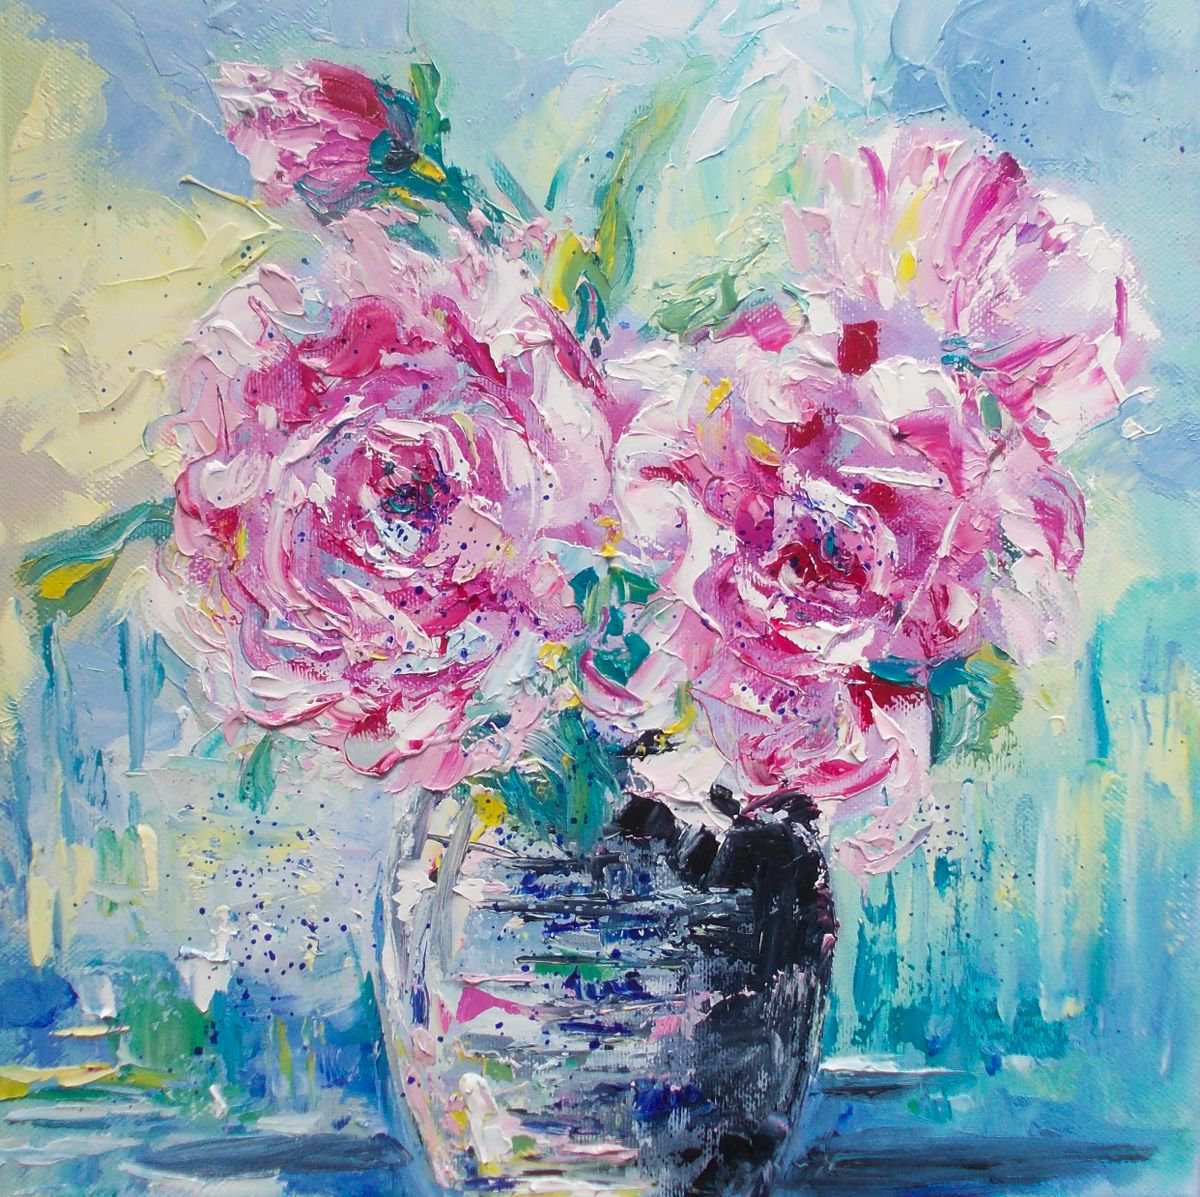 Roses painting on canvas-Small floral painting-Original roses oil painting on canvas by Antigoni Tziora